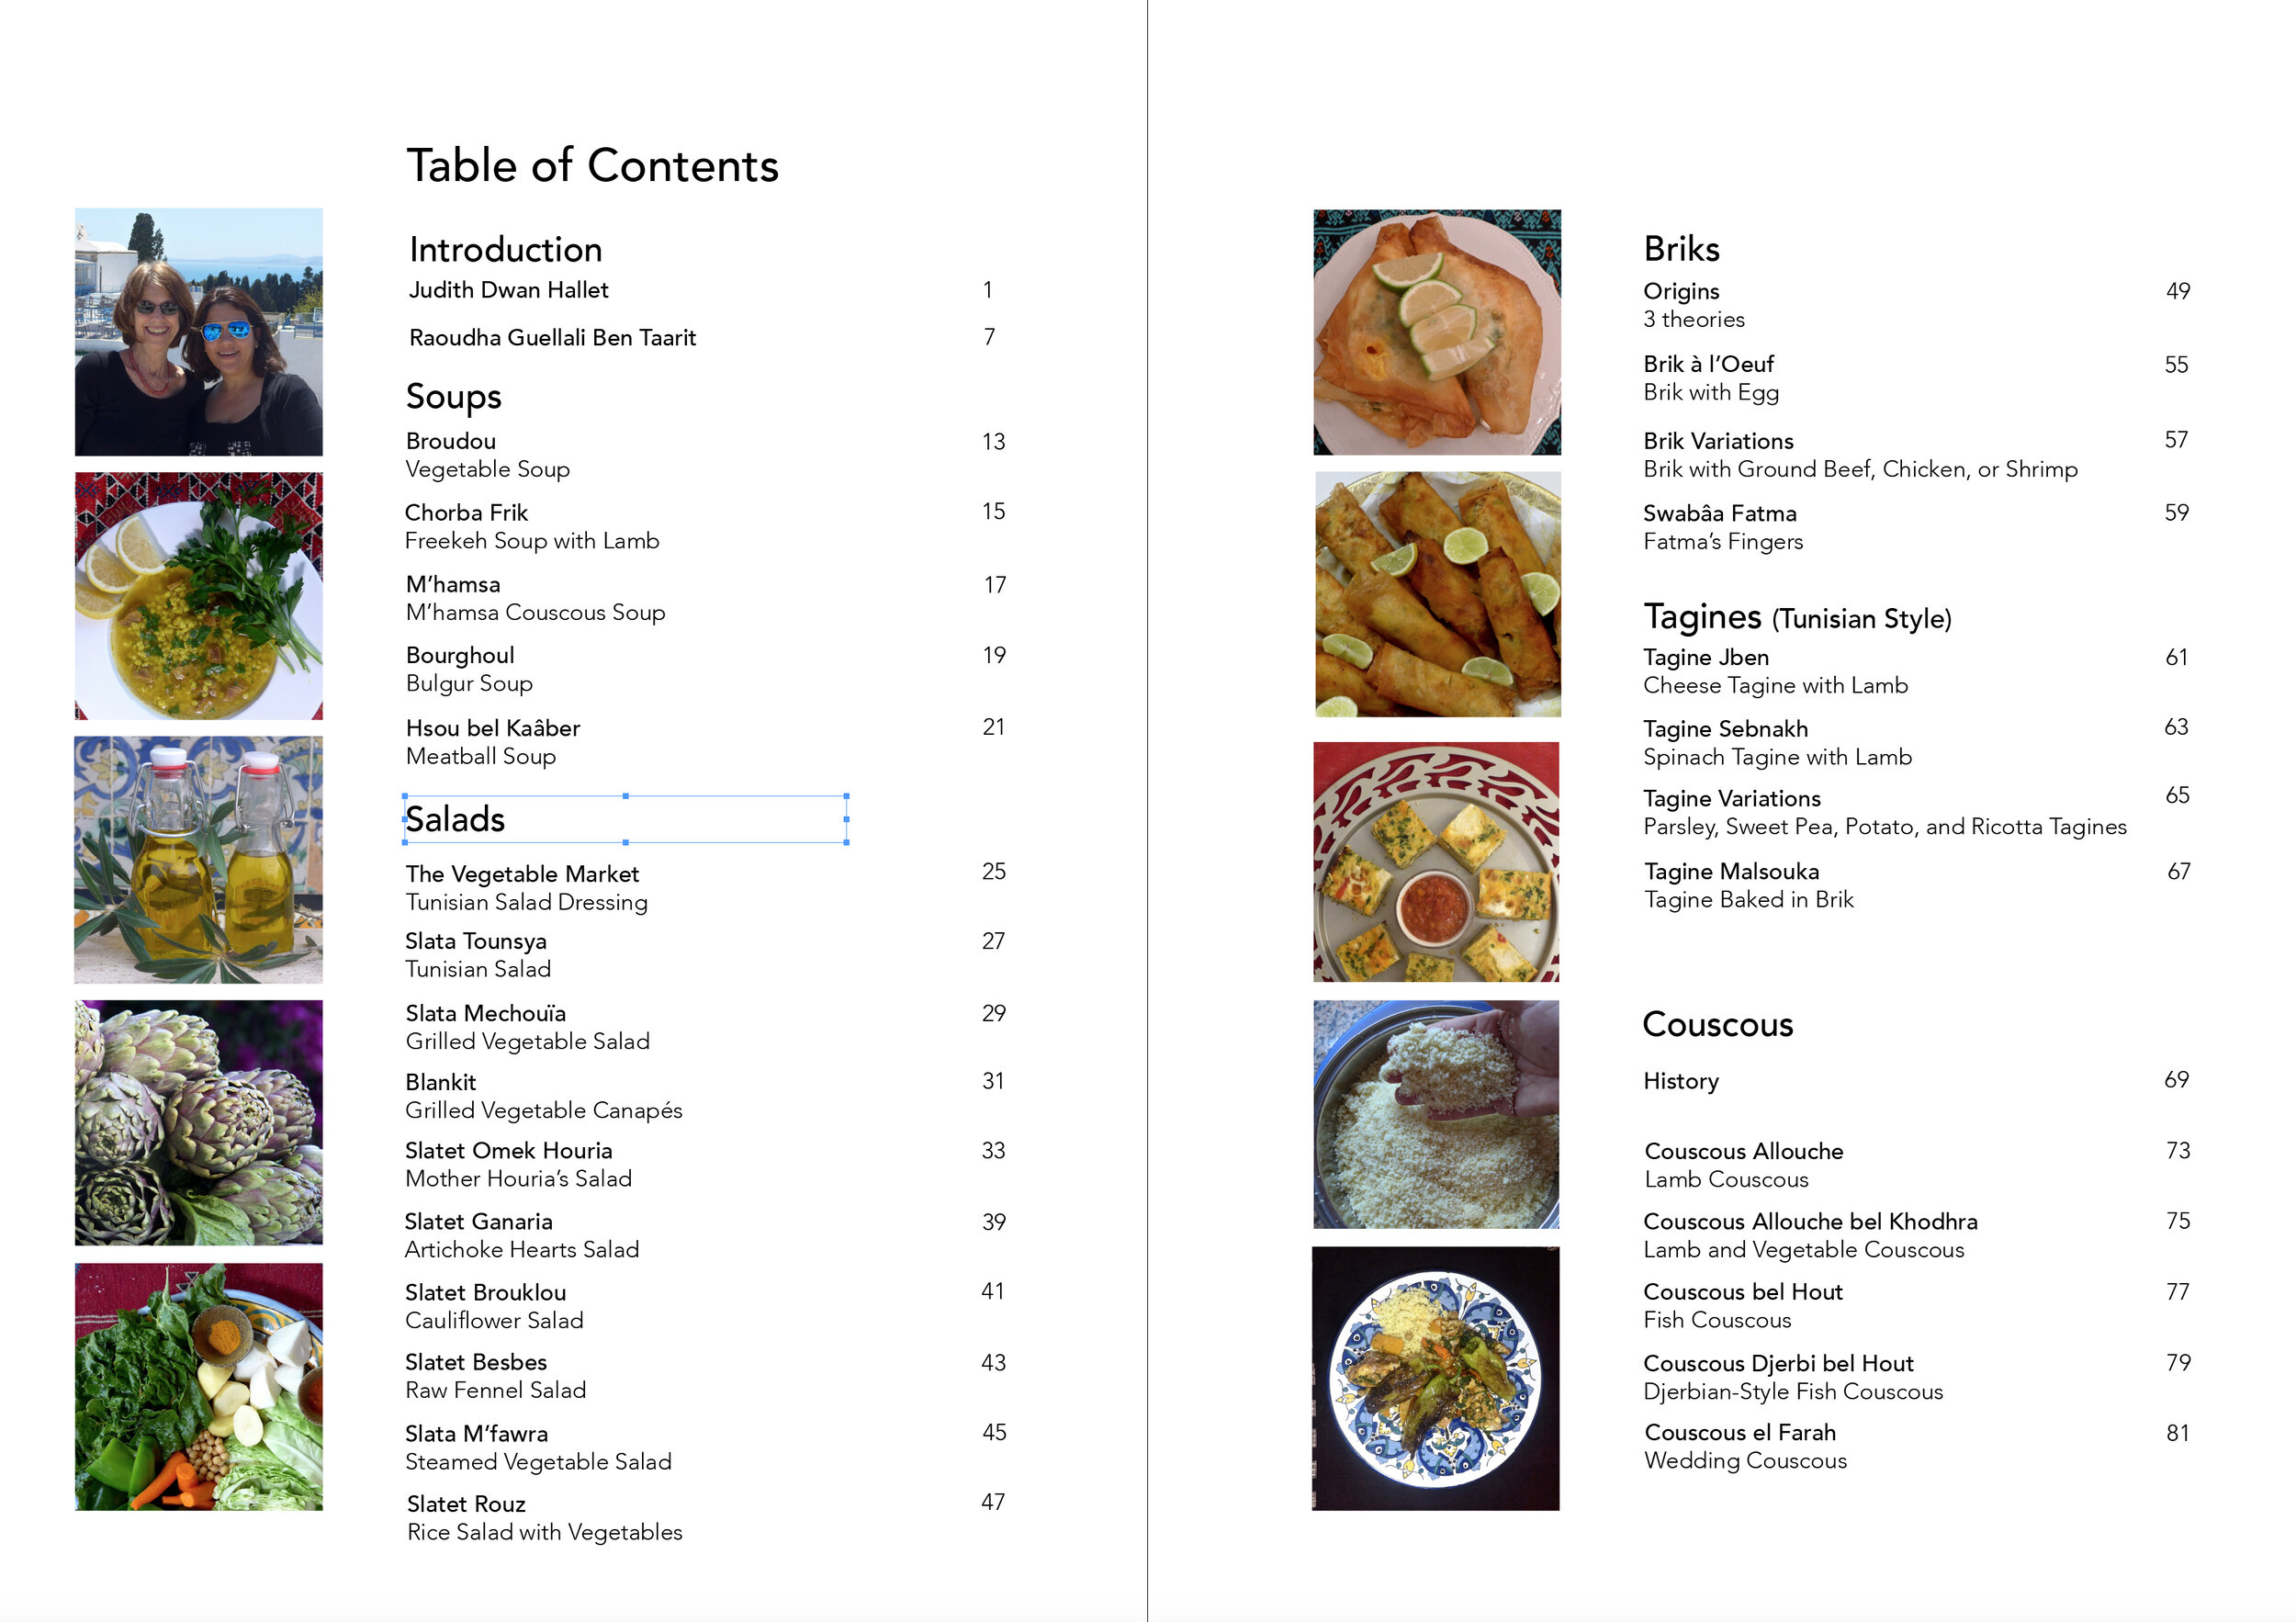 Table of contents 1.jpg